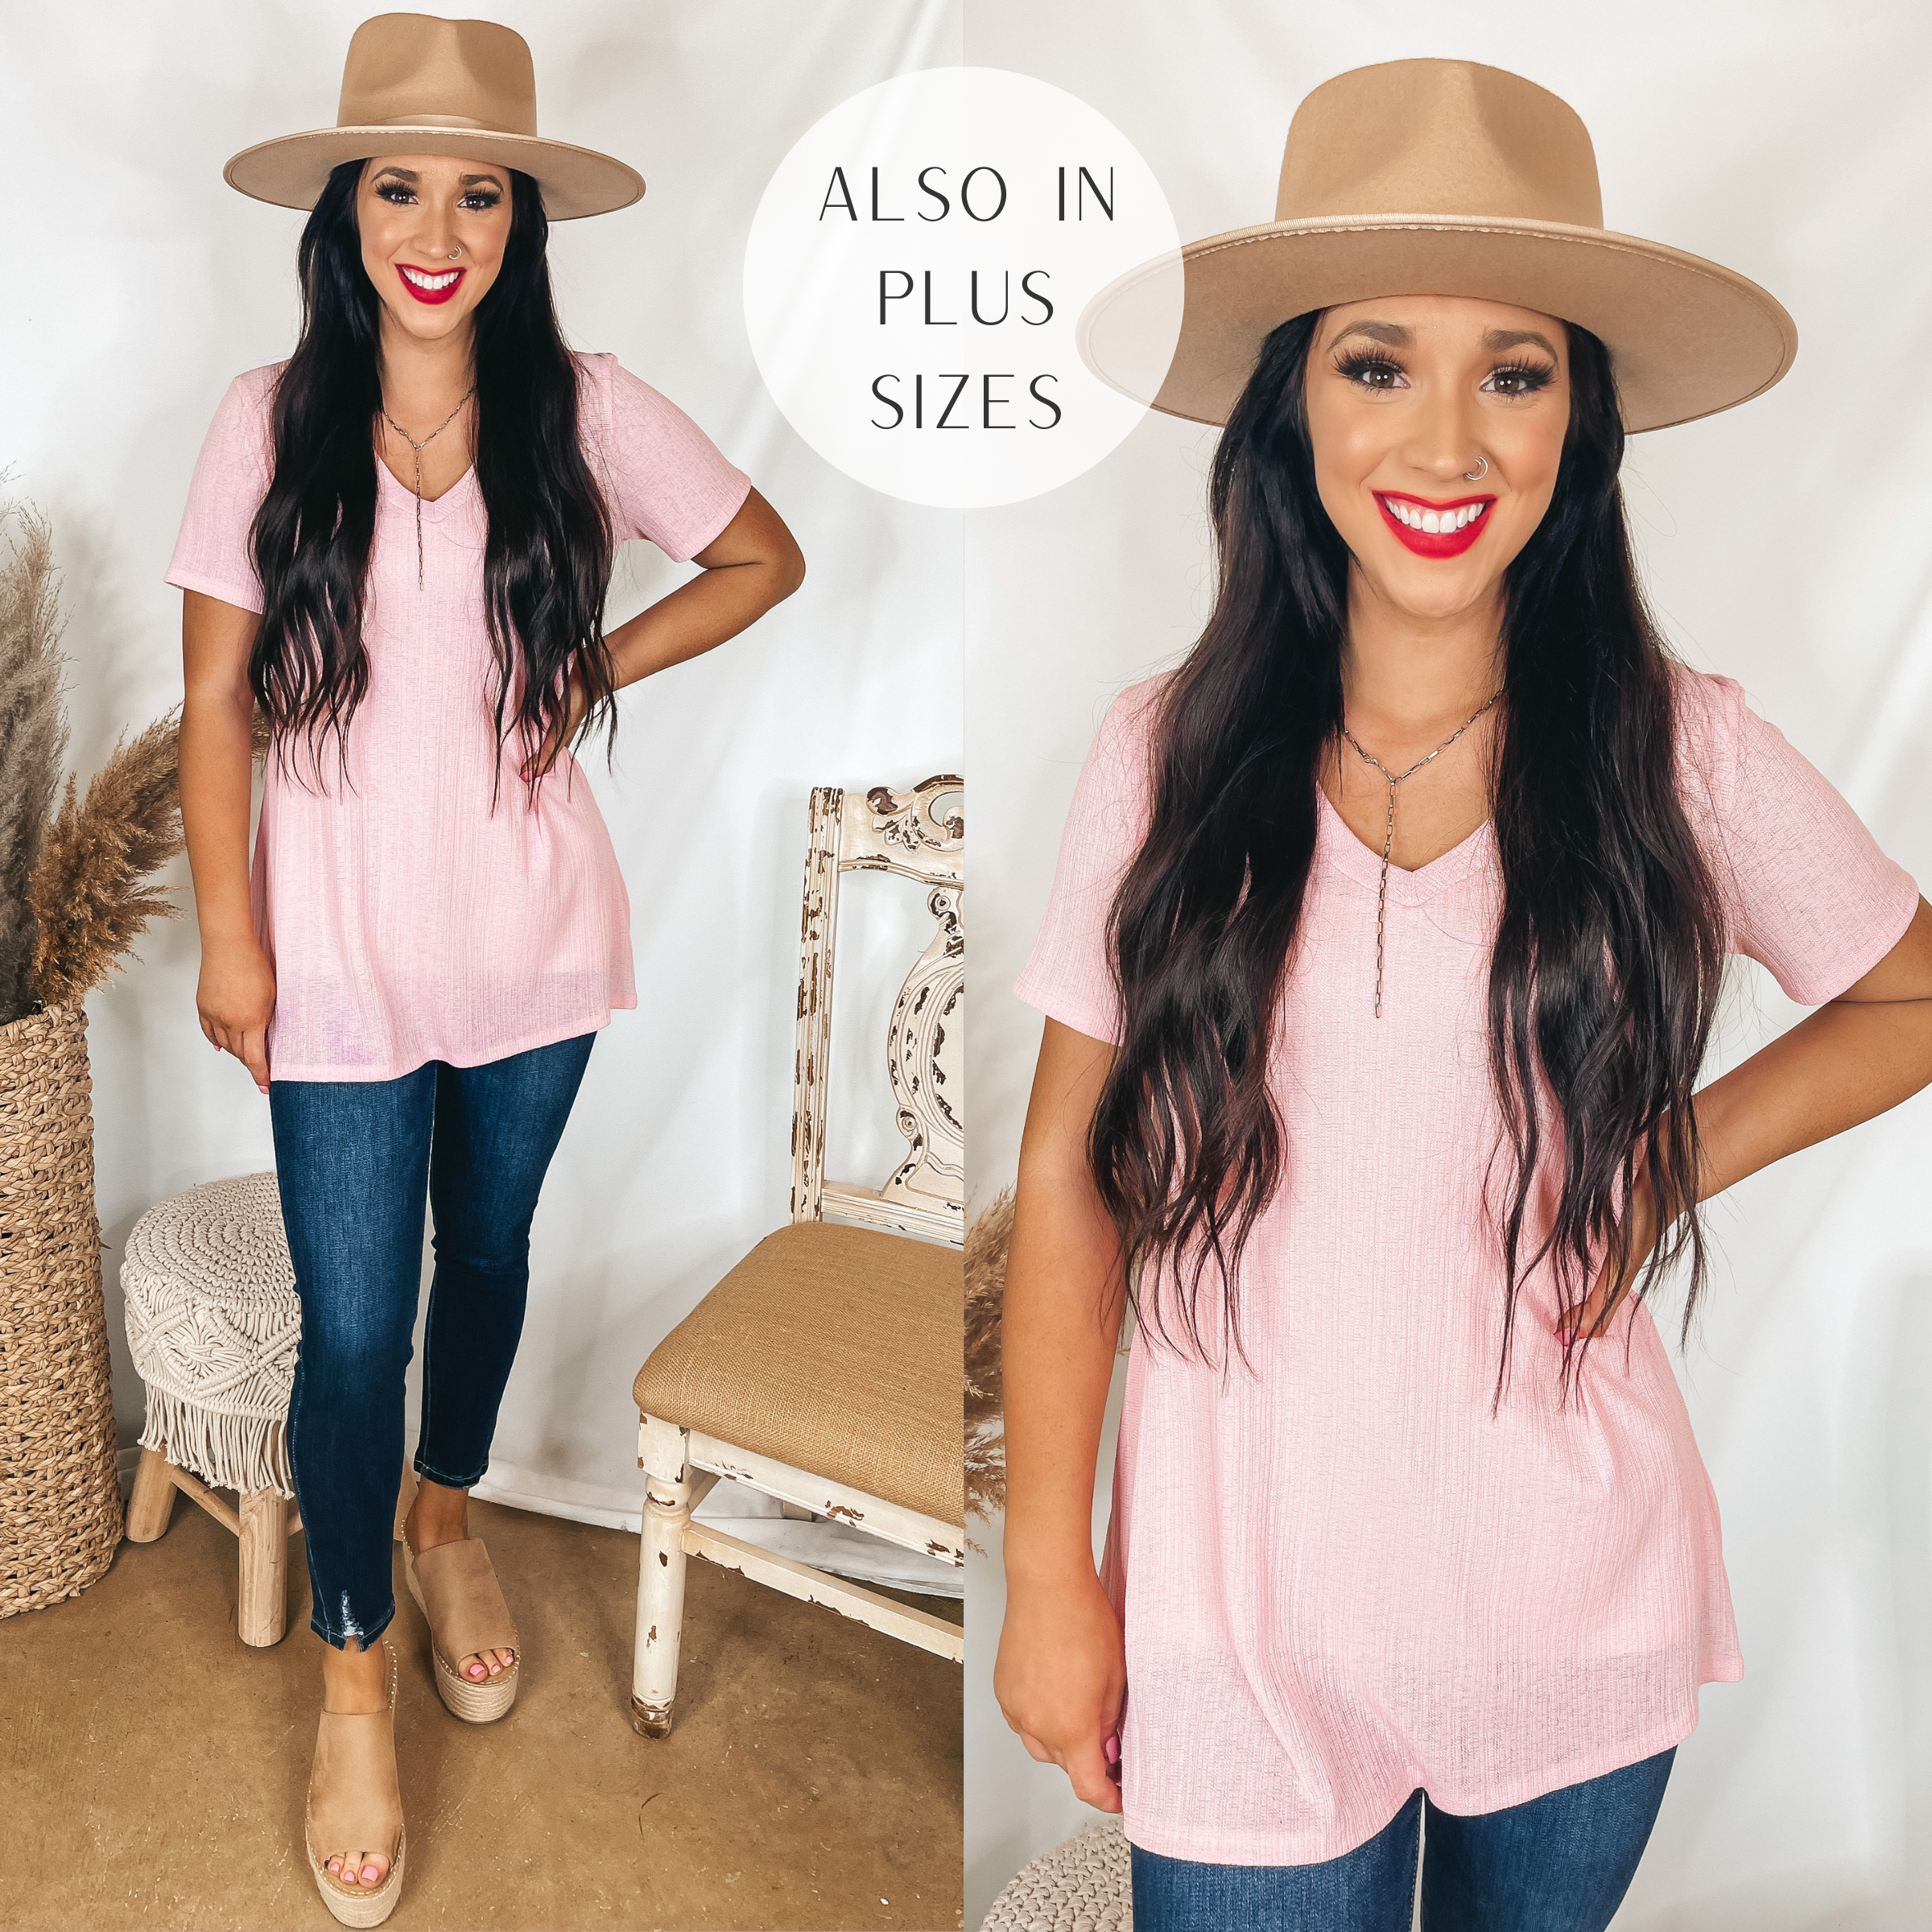 Model is wearing a baby pink ribbed top that has a v neck and short sleeves. Model has it paired with dark wash skinny jeans, tan wedges, and a tan hat.